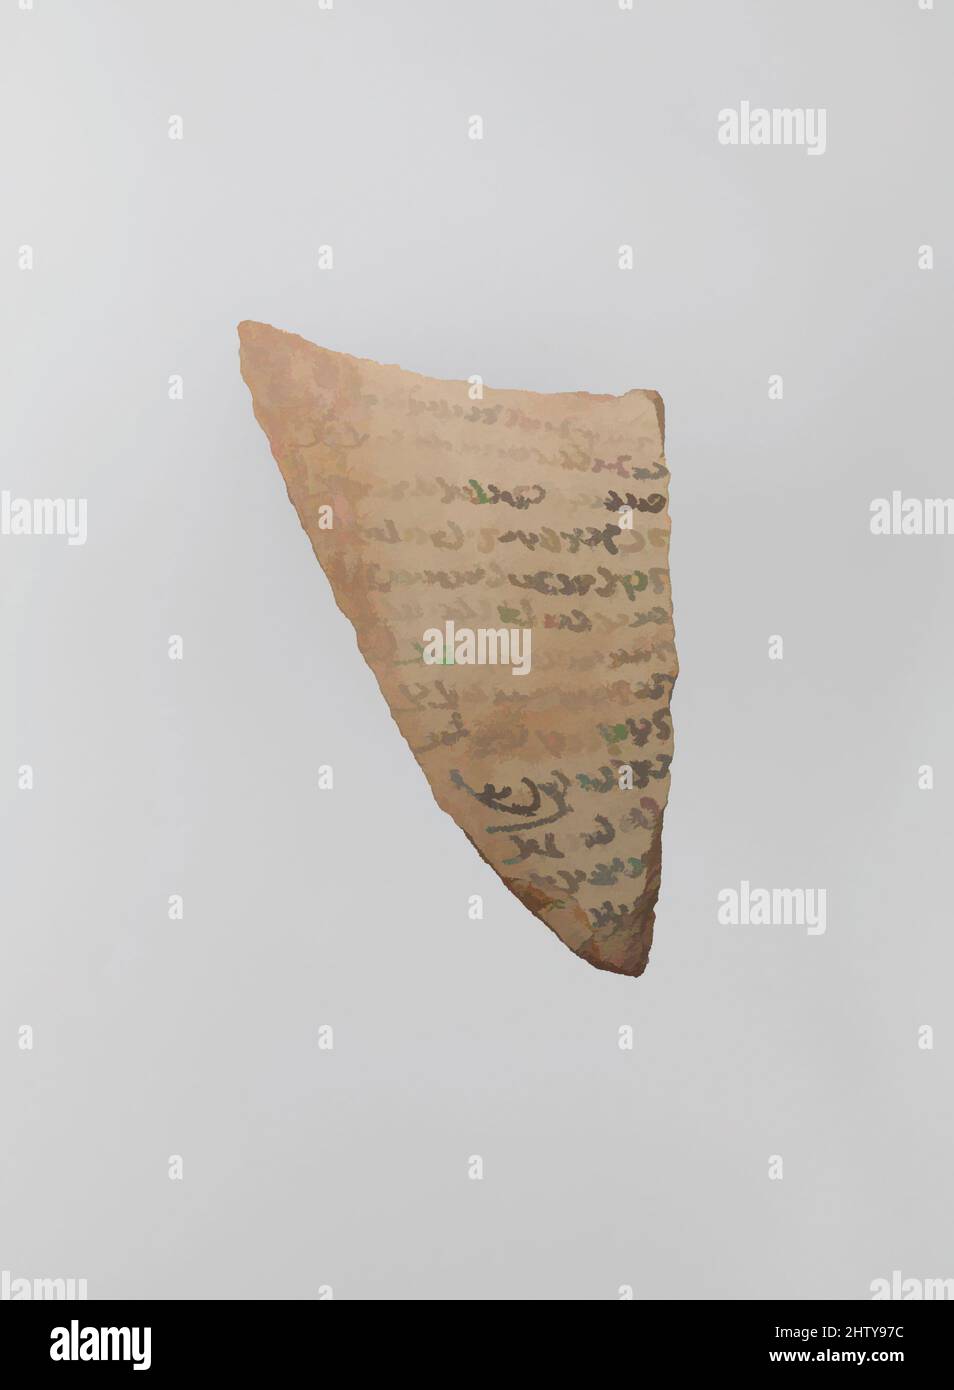 Art inspired by Magic Bowl and an Ostrakon, 9th–10th century, Found Iran, Nishapur, Earthenware; painted, unglazed, H. 4 1/8 in. (10.4 cm), Ceramics, This fragment appears to be written in a local variant of Pahlavi, the ancient script of the Persian language, which remained in use, Classic works modernized by Artotop with a splash of modernity. Shapes, color and value, eye-catching visual impact on art. Emotions through freedom of artworks in a contemporary way. A timeless message pursuing a wildly creative new direction. Artists turning to the digital medium and creating the Artotop NFT Stock Photo